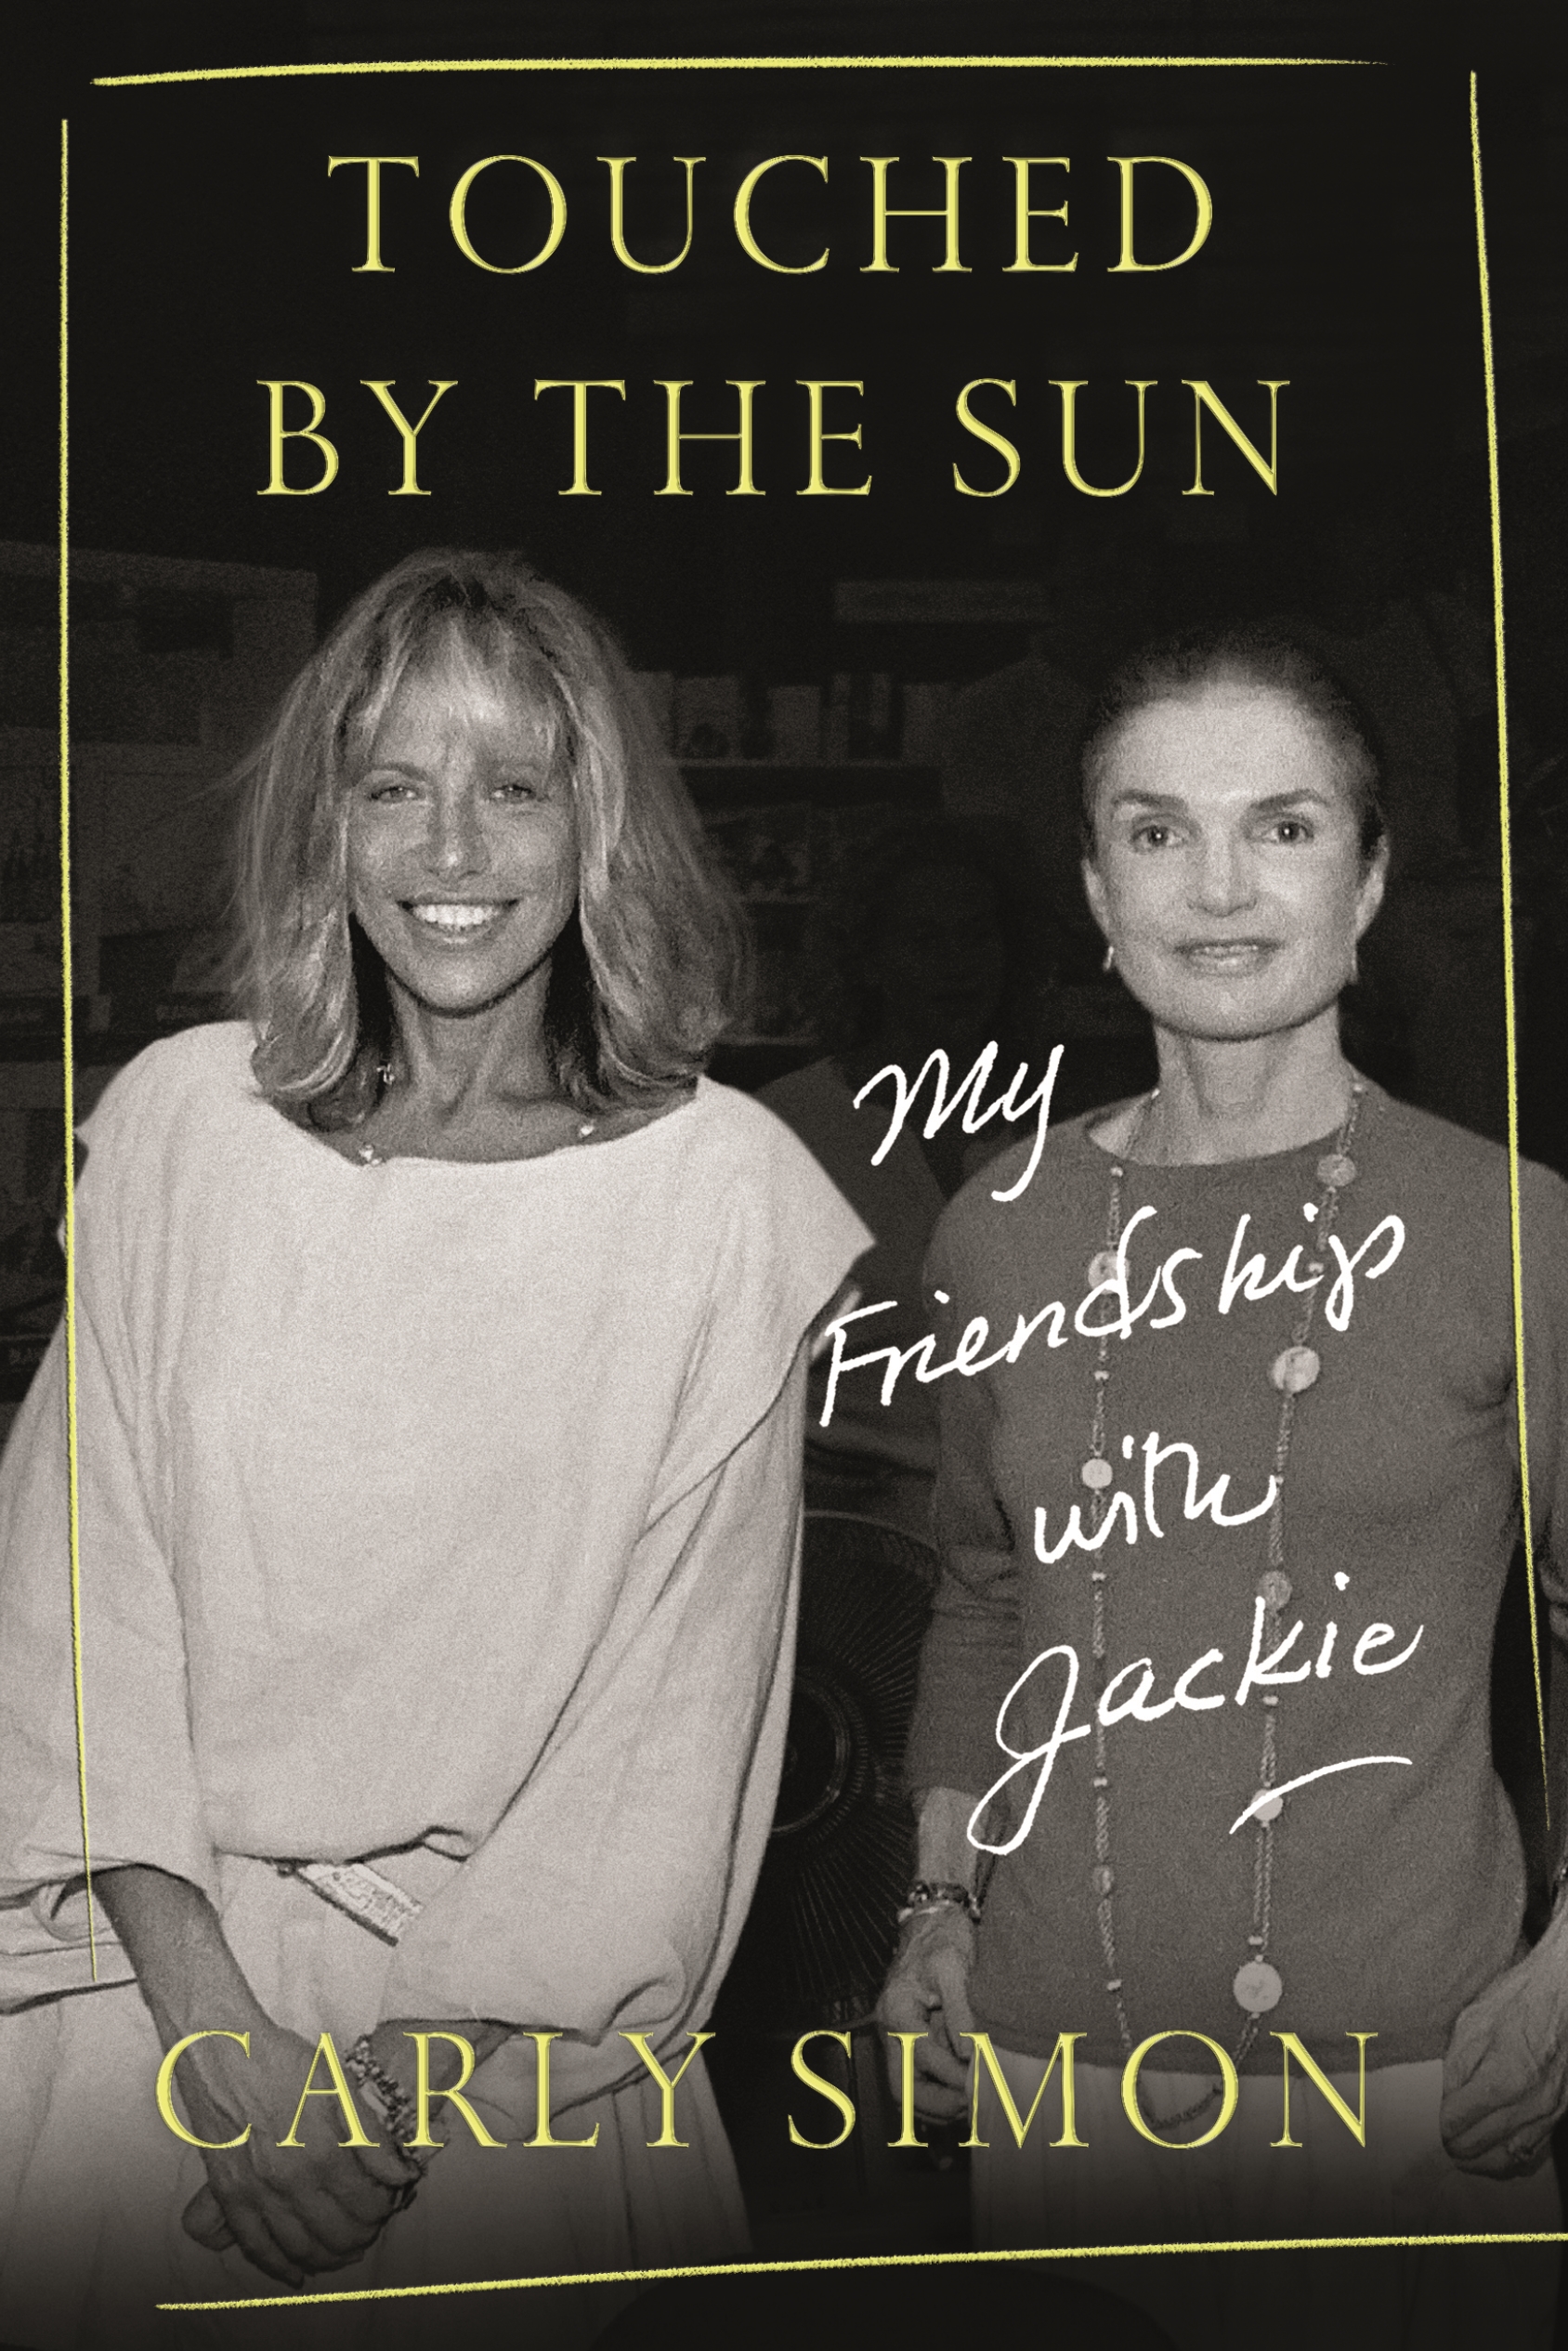 Book “Touched by the Sun” by Carly Simon — October 22, 2019